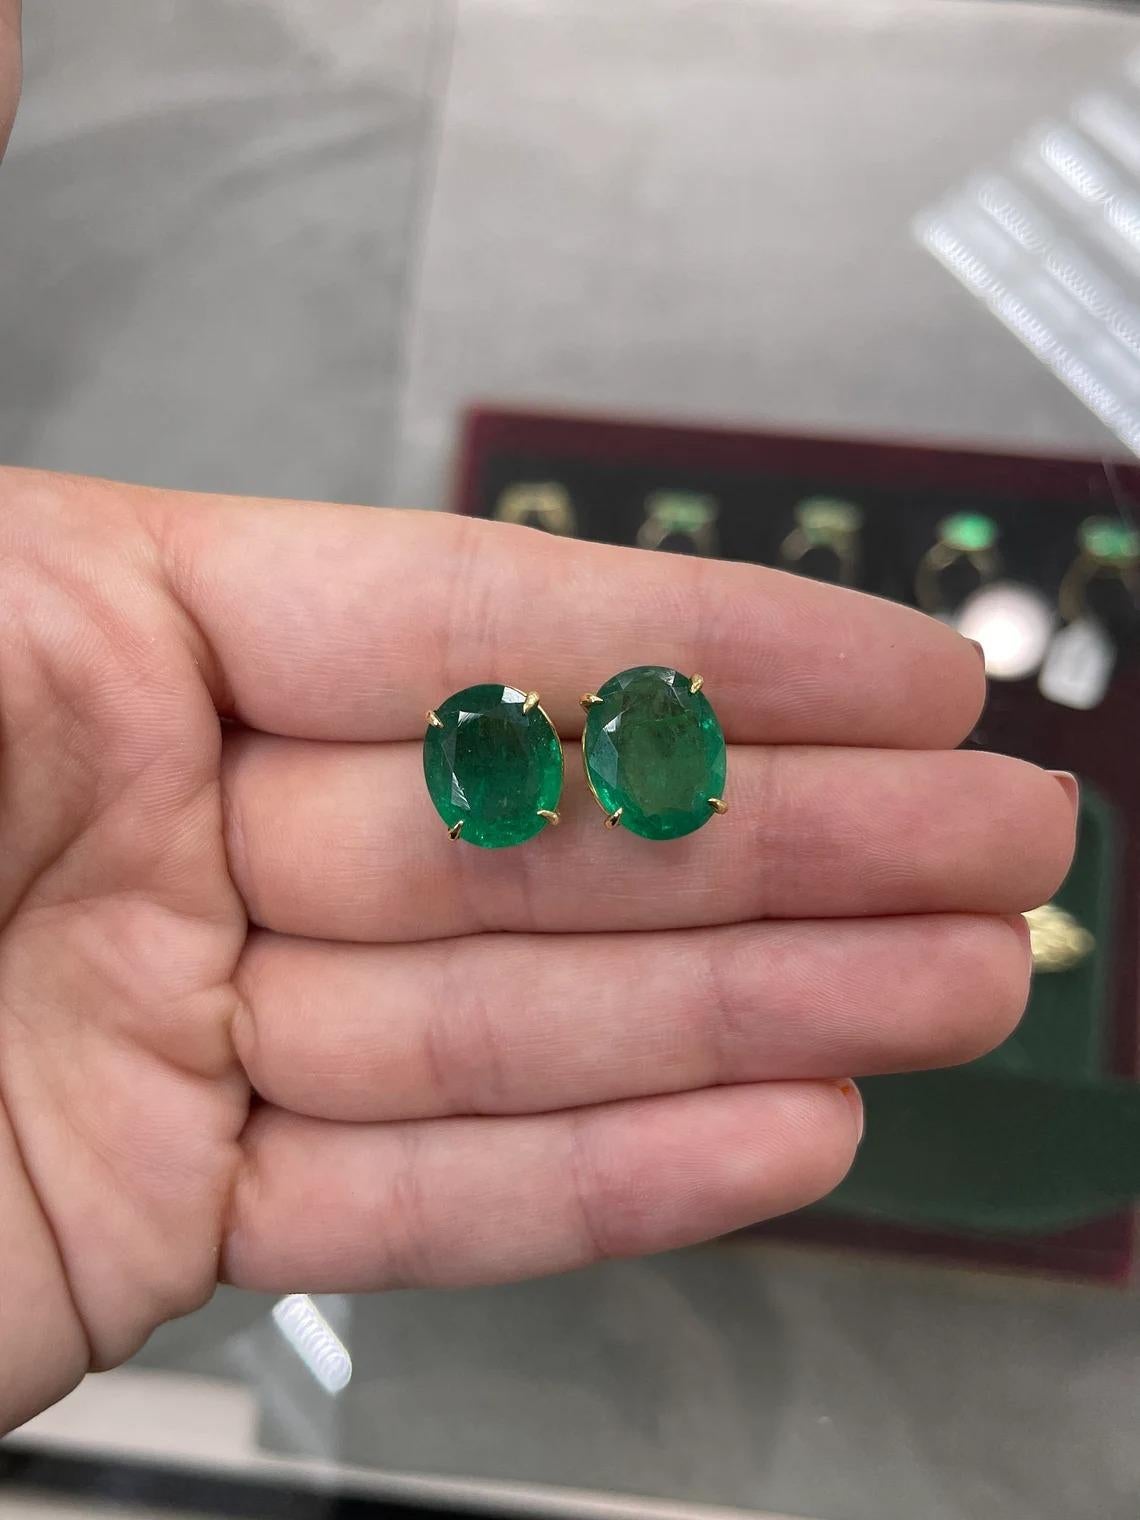 These earrings are not for the faint of heart! Featured here is a stunning set of Oval cut emerald studs in fine 18K yellow gold. Displayed are striking, dark-green emeralds with incredible size and high quality that make these so unique. The